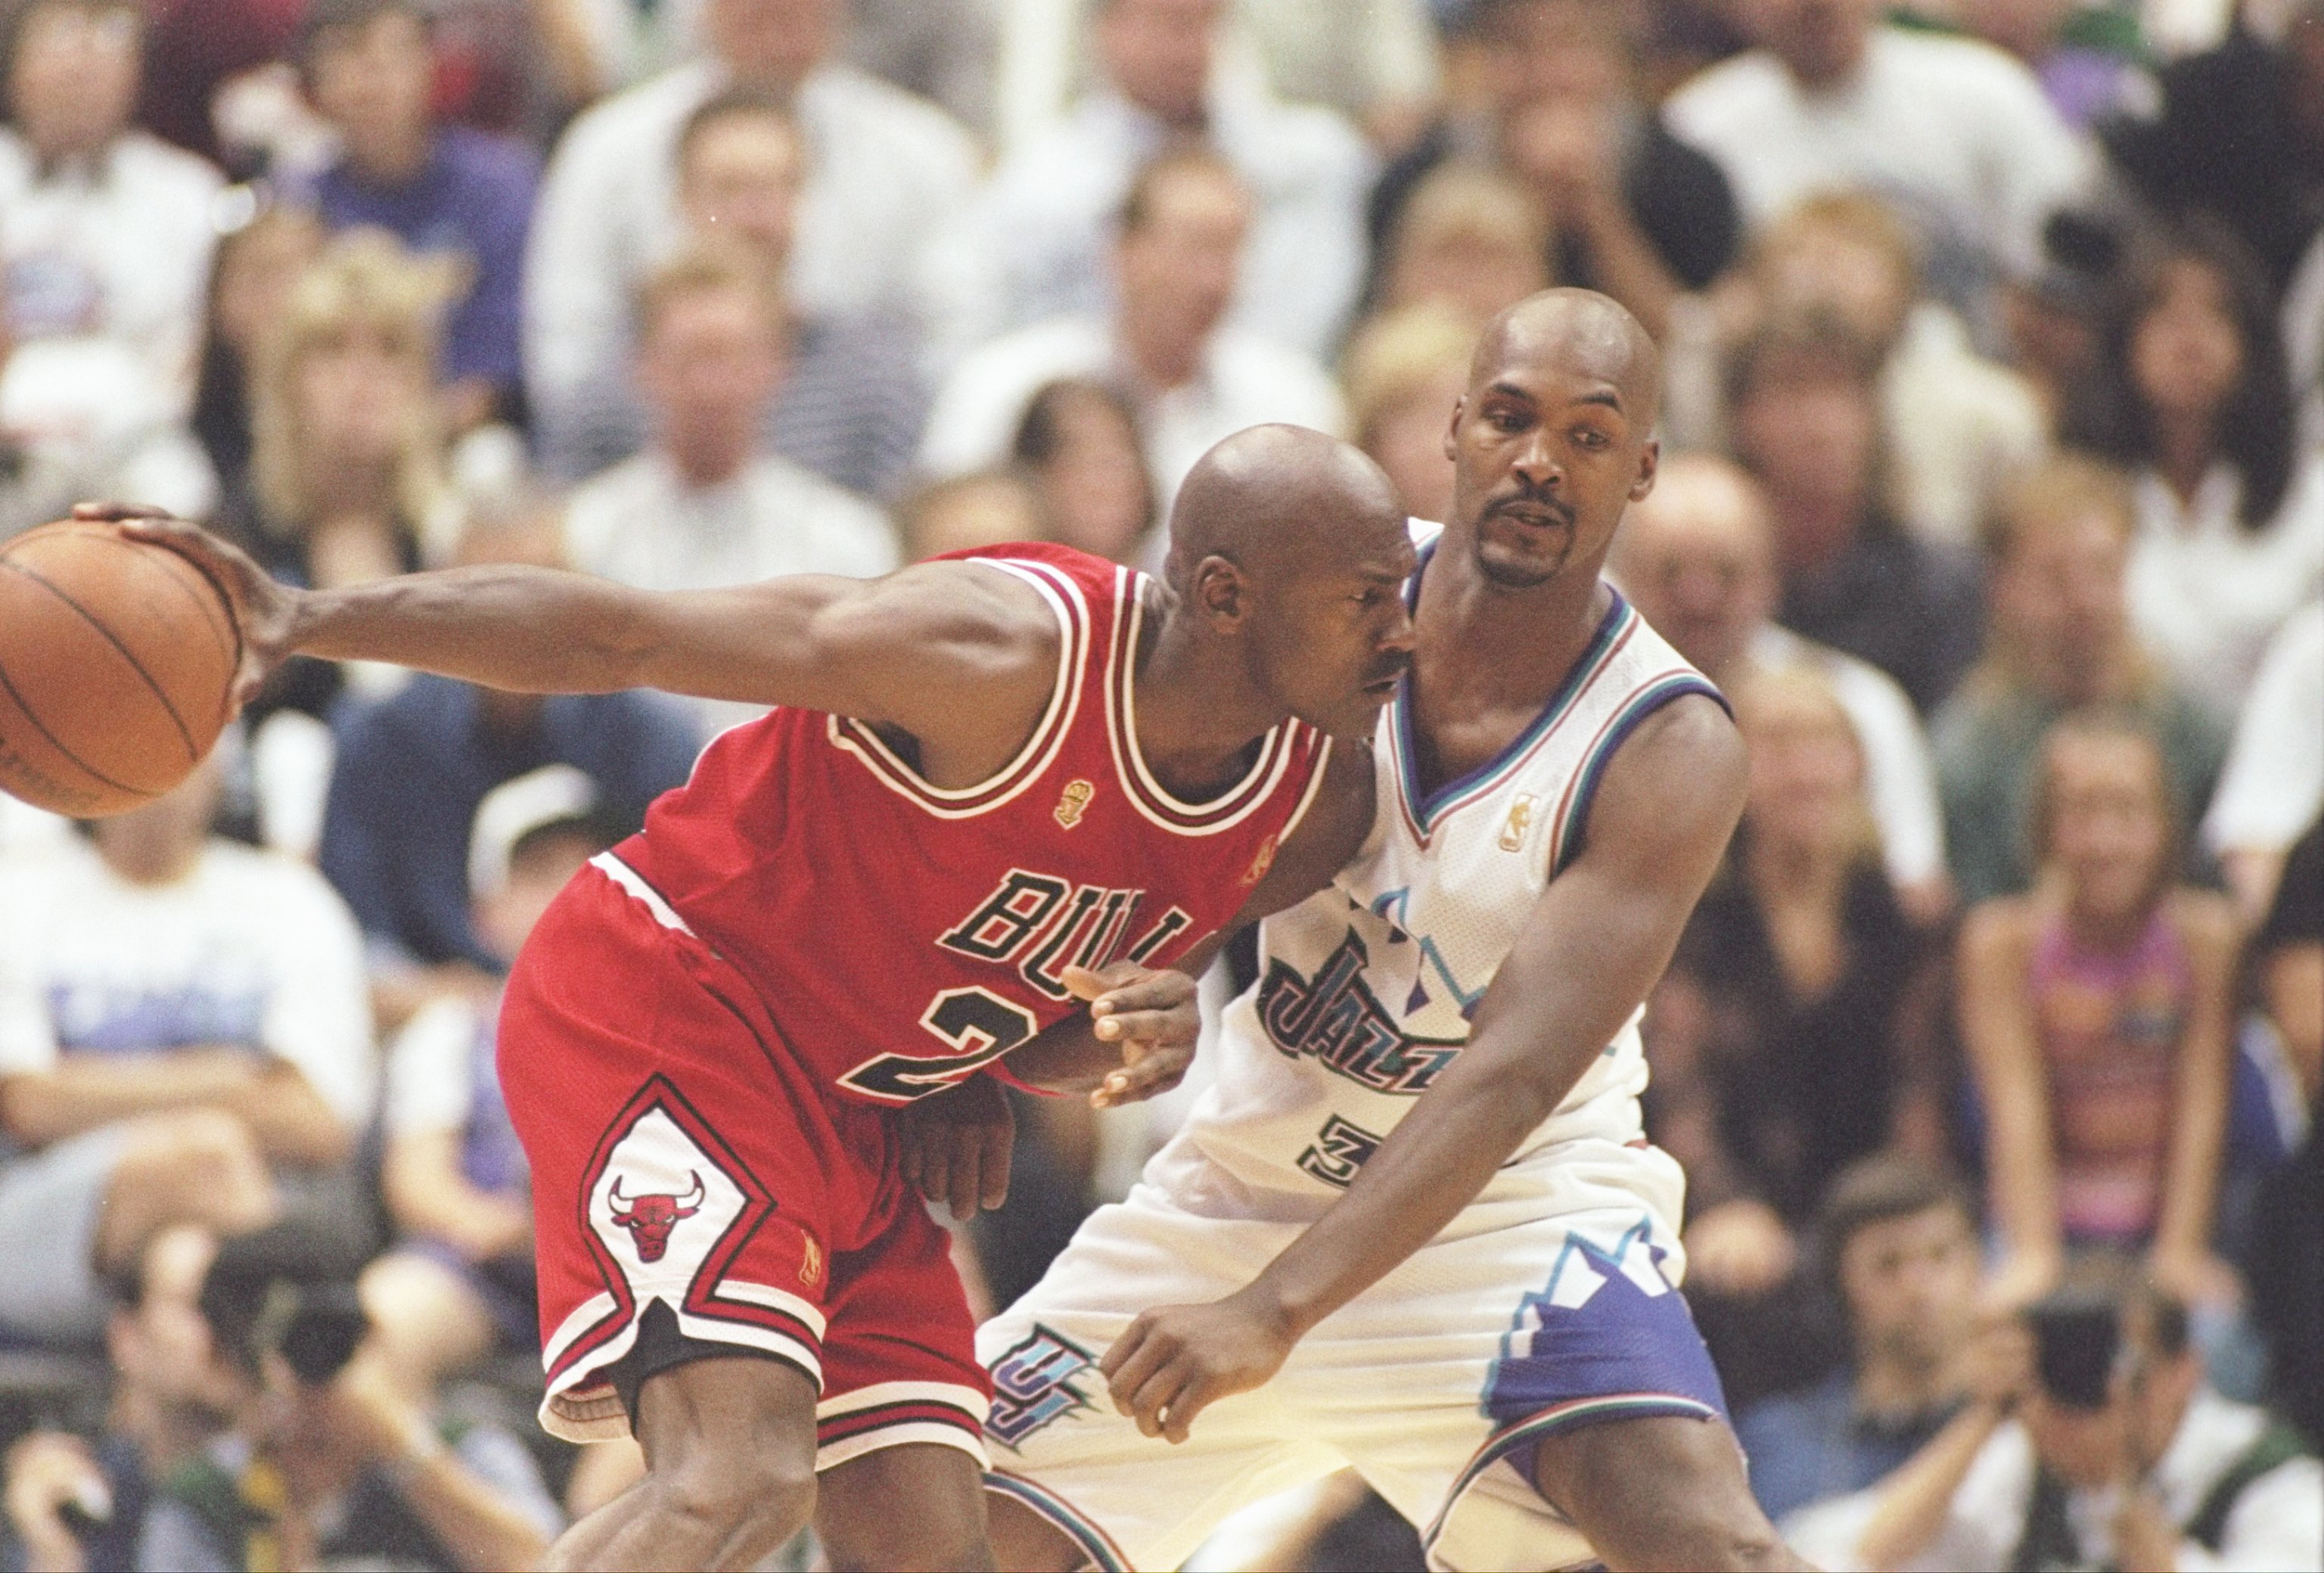 Chicago Bulls: 30 greatest Michael Jordan moments of all time - Page 2